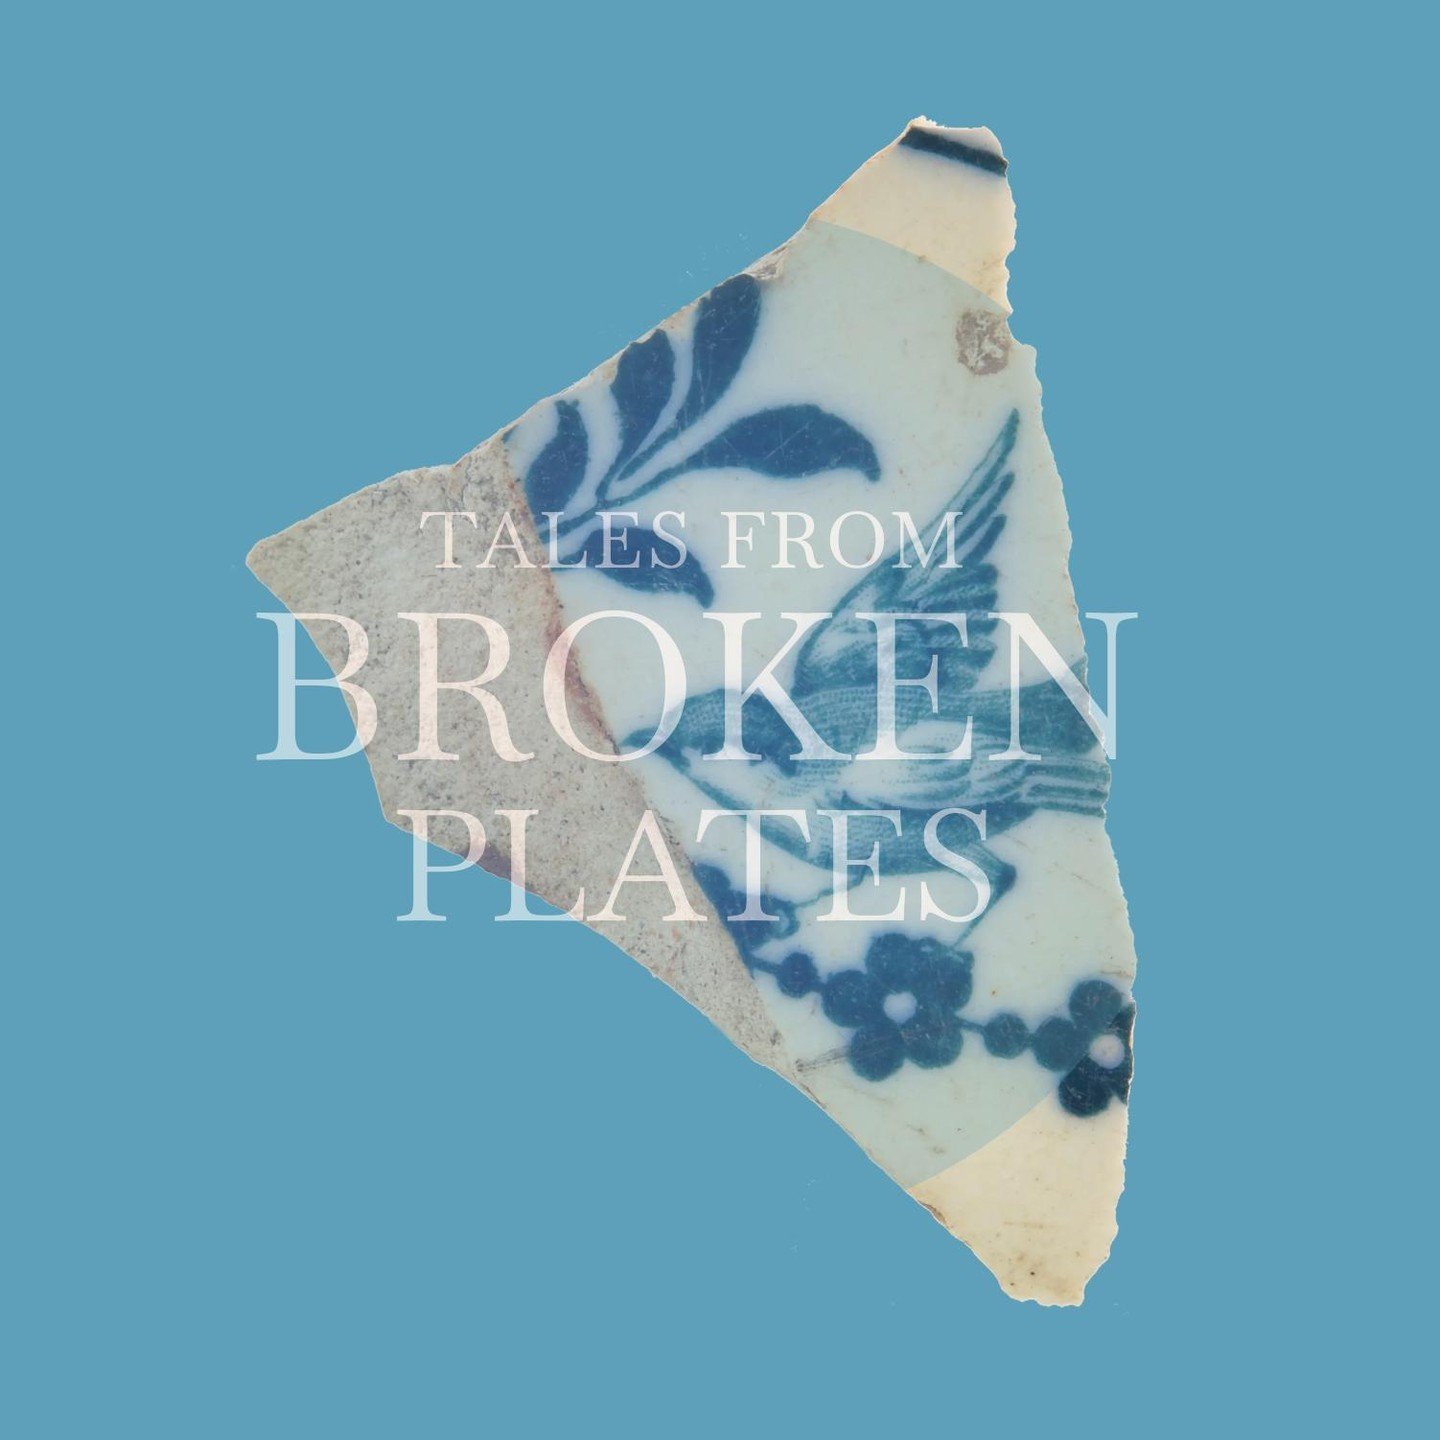 Your bookshelf is begging you.⁠
⁠
Mark Lawson Bell's 'Tales From Broken Plates' is a masterpiece. A richly visualised collection of playfully narrated, sensitively imagined tales of the demise of broken objects. The book you can't not buy! ⁠
⁠
Availa